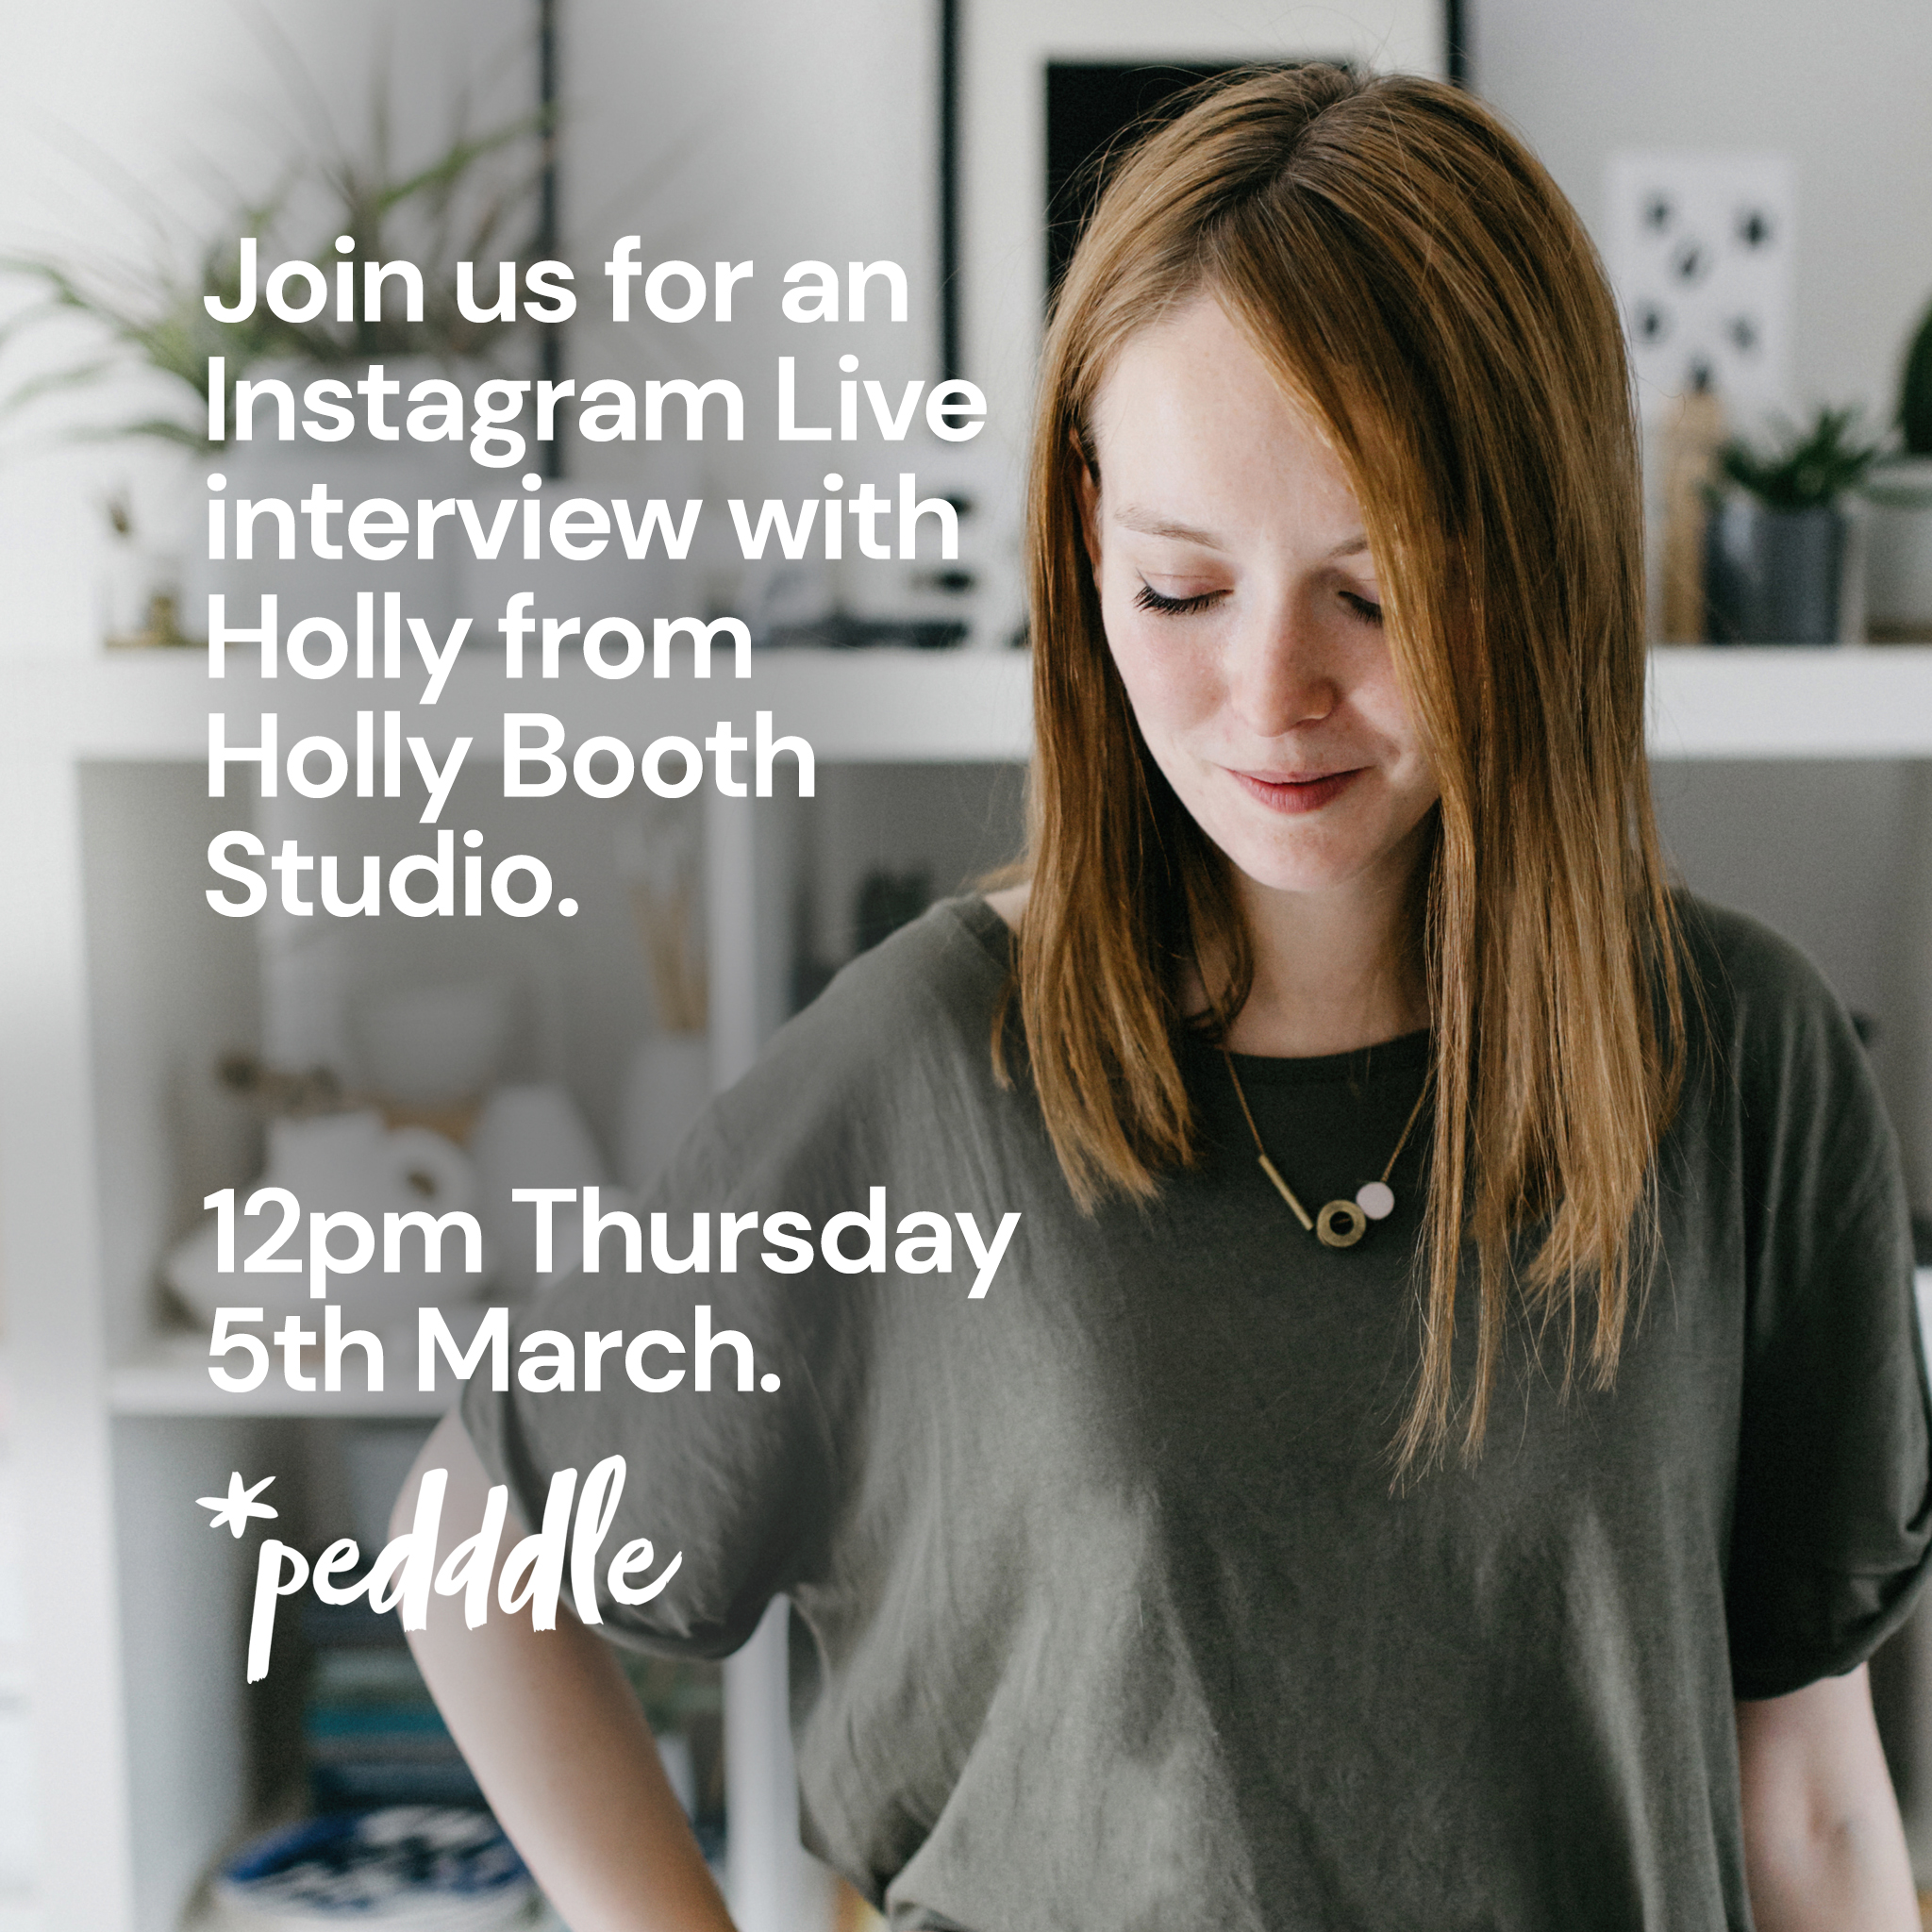 Holly Booth Studio, instagram live. Pedddle